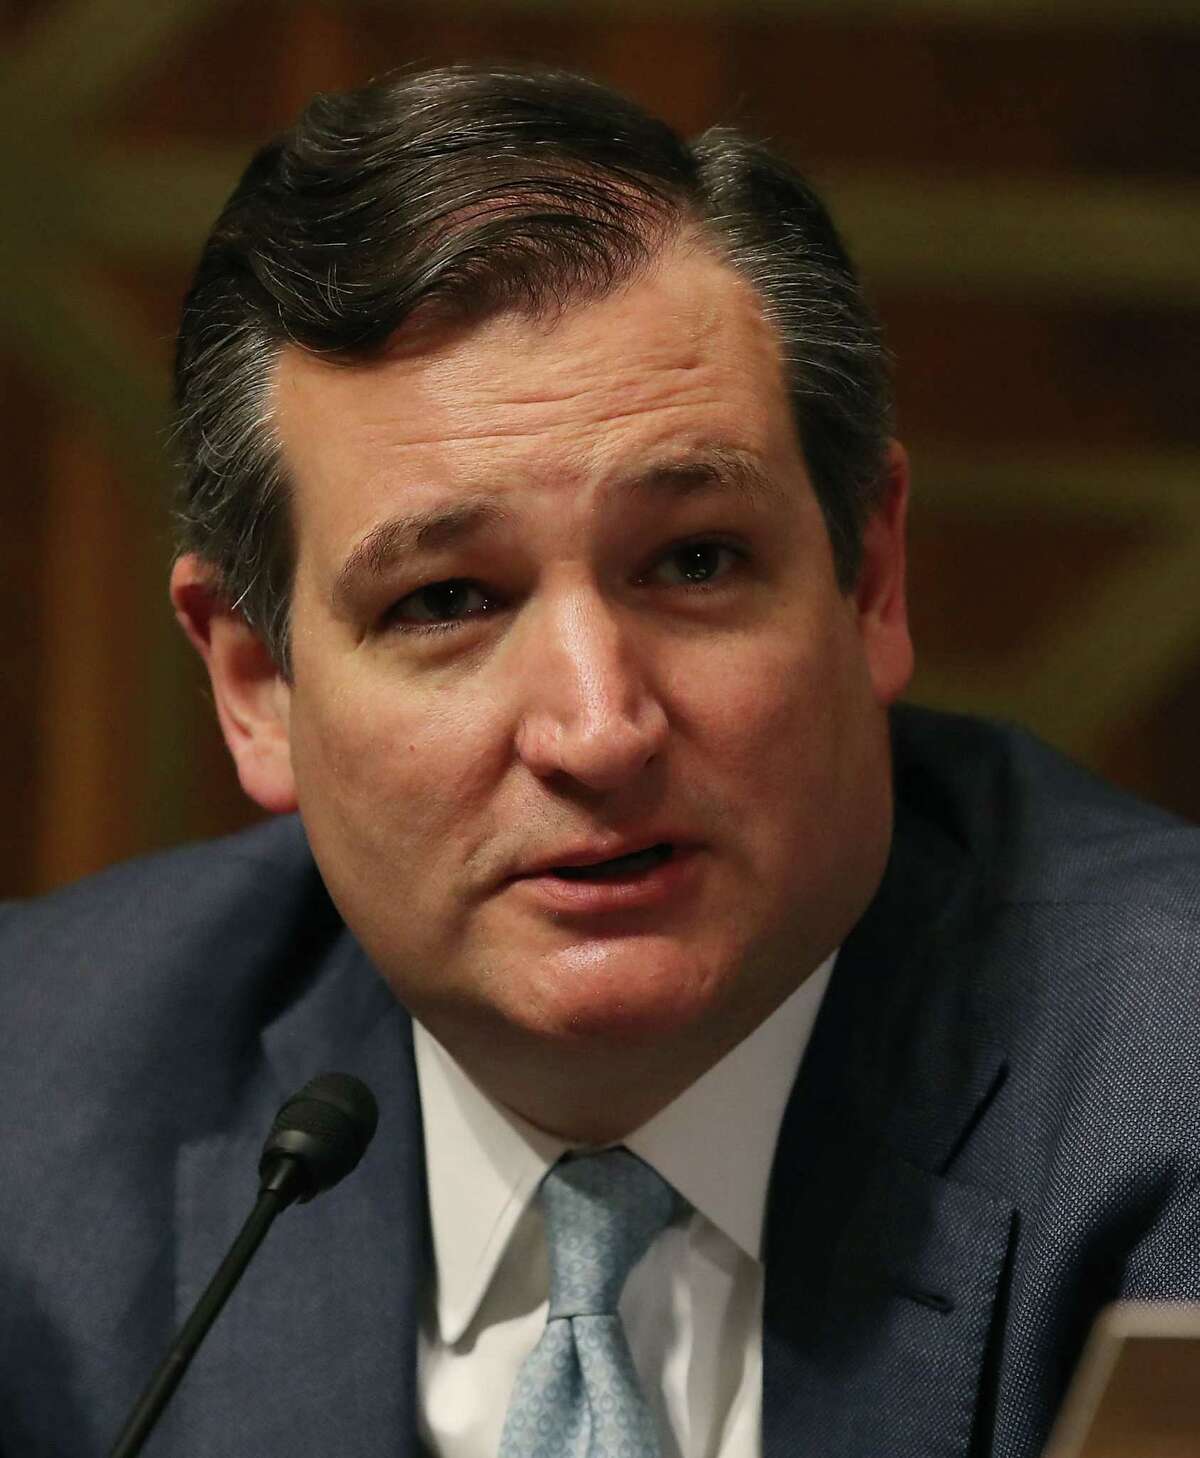 U.S. Sen. Ted Cruz’s 2012 campaign improperly reported loans he received from Goldman Sachs Group Inc. and Citigroup, according to a preliminary Federal Election Commission audit.